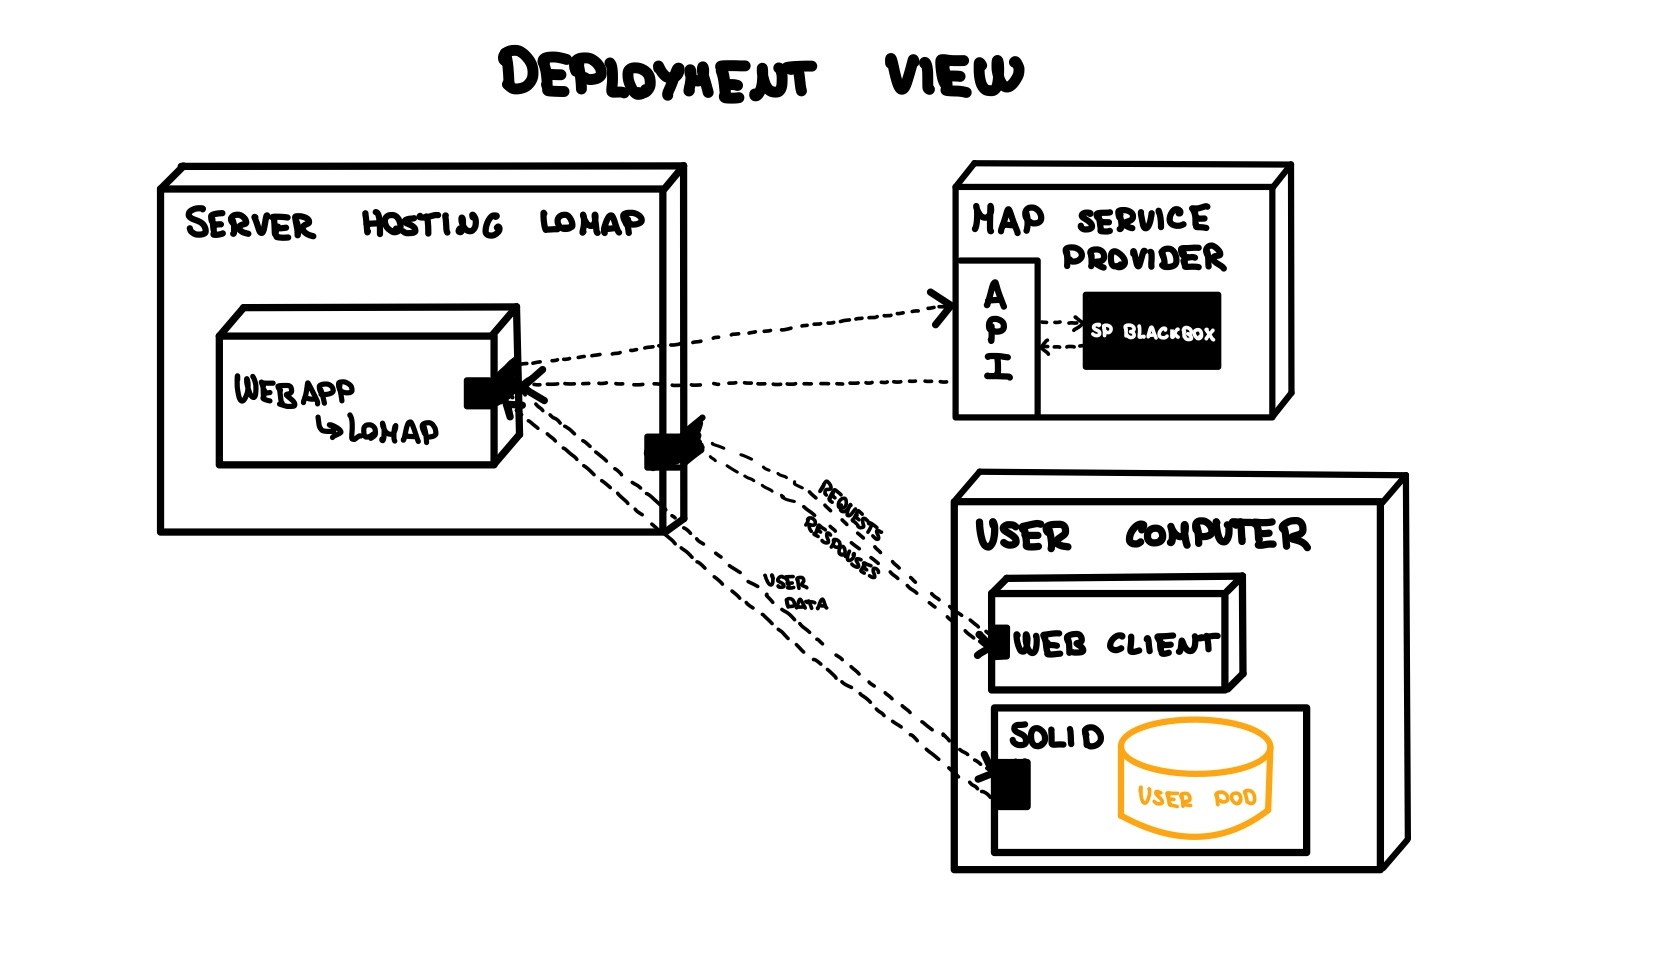 Deploy view general structure